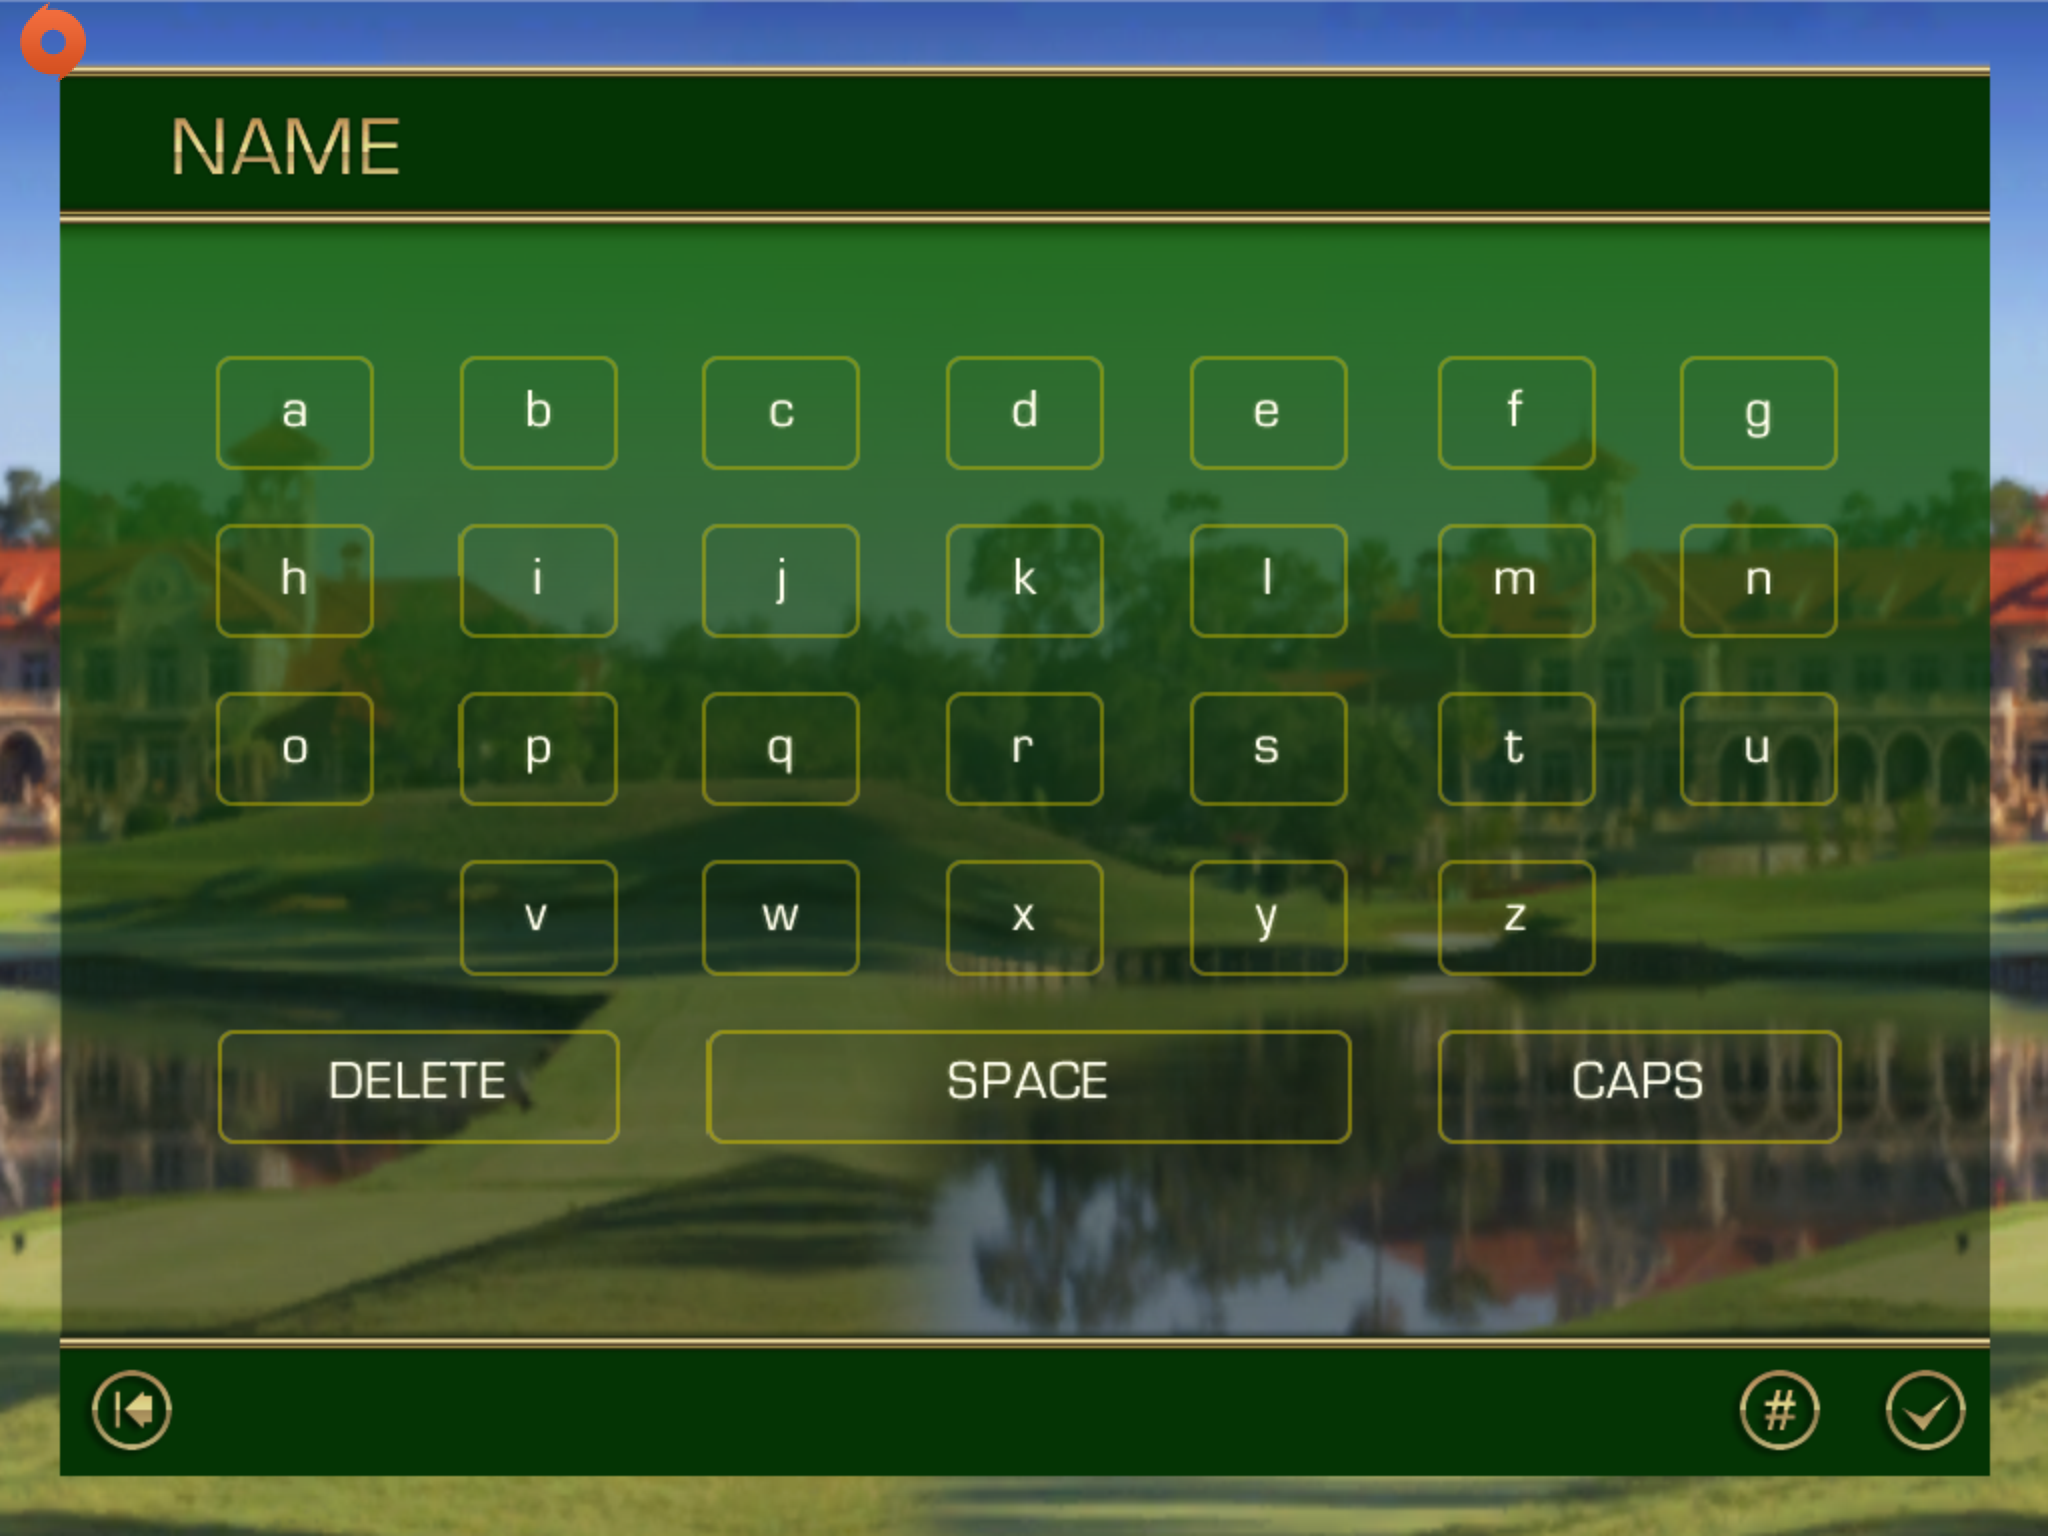 Name entry screen in Tiger Woods PGA Tour 12 for iOS